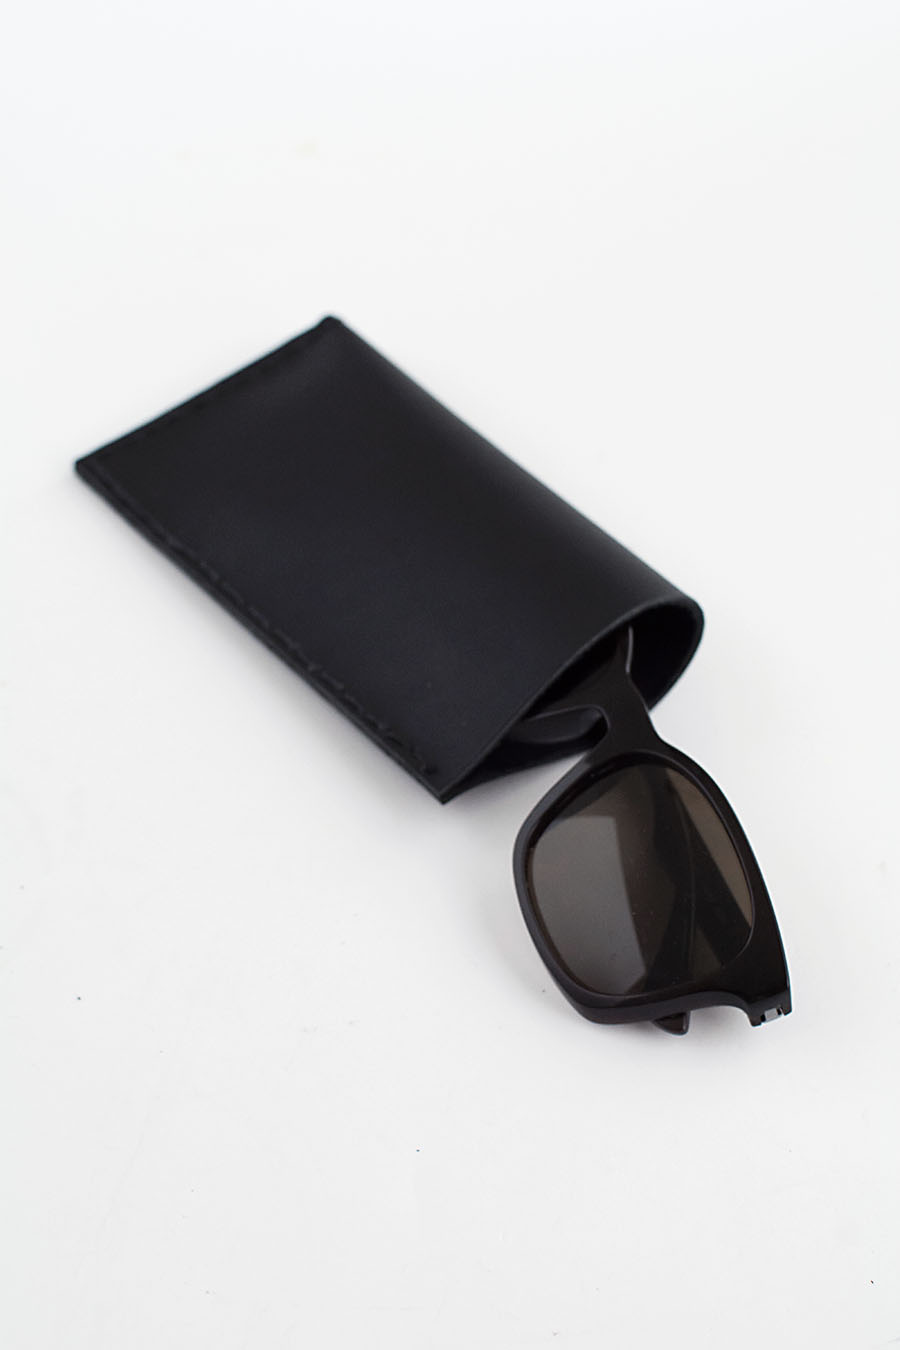 Leather Sunglasses Pouch DIY